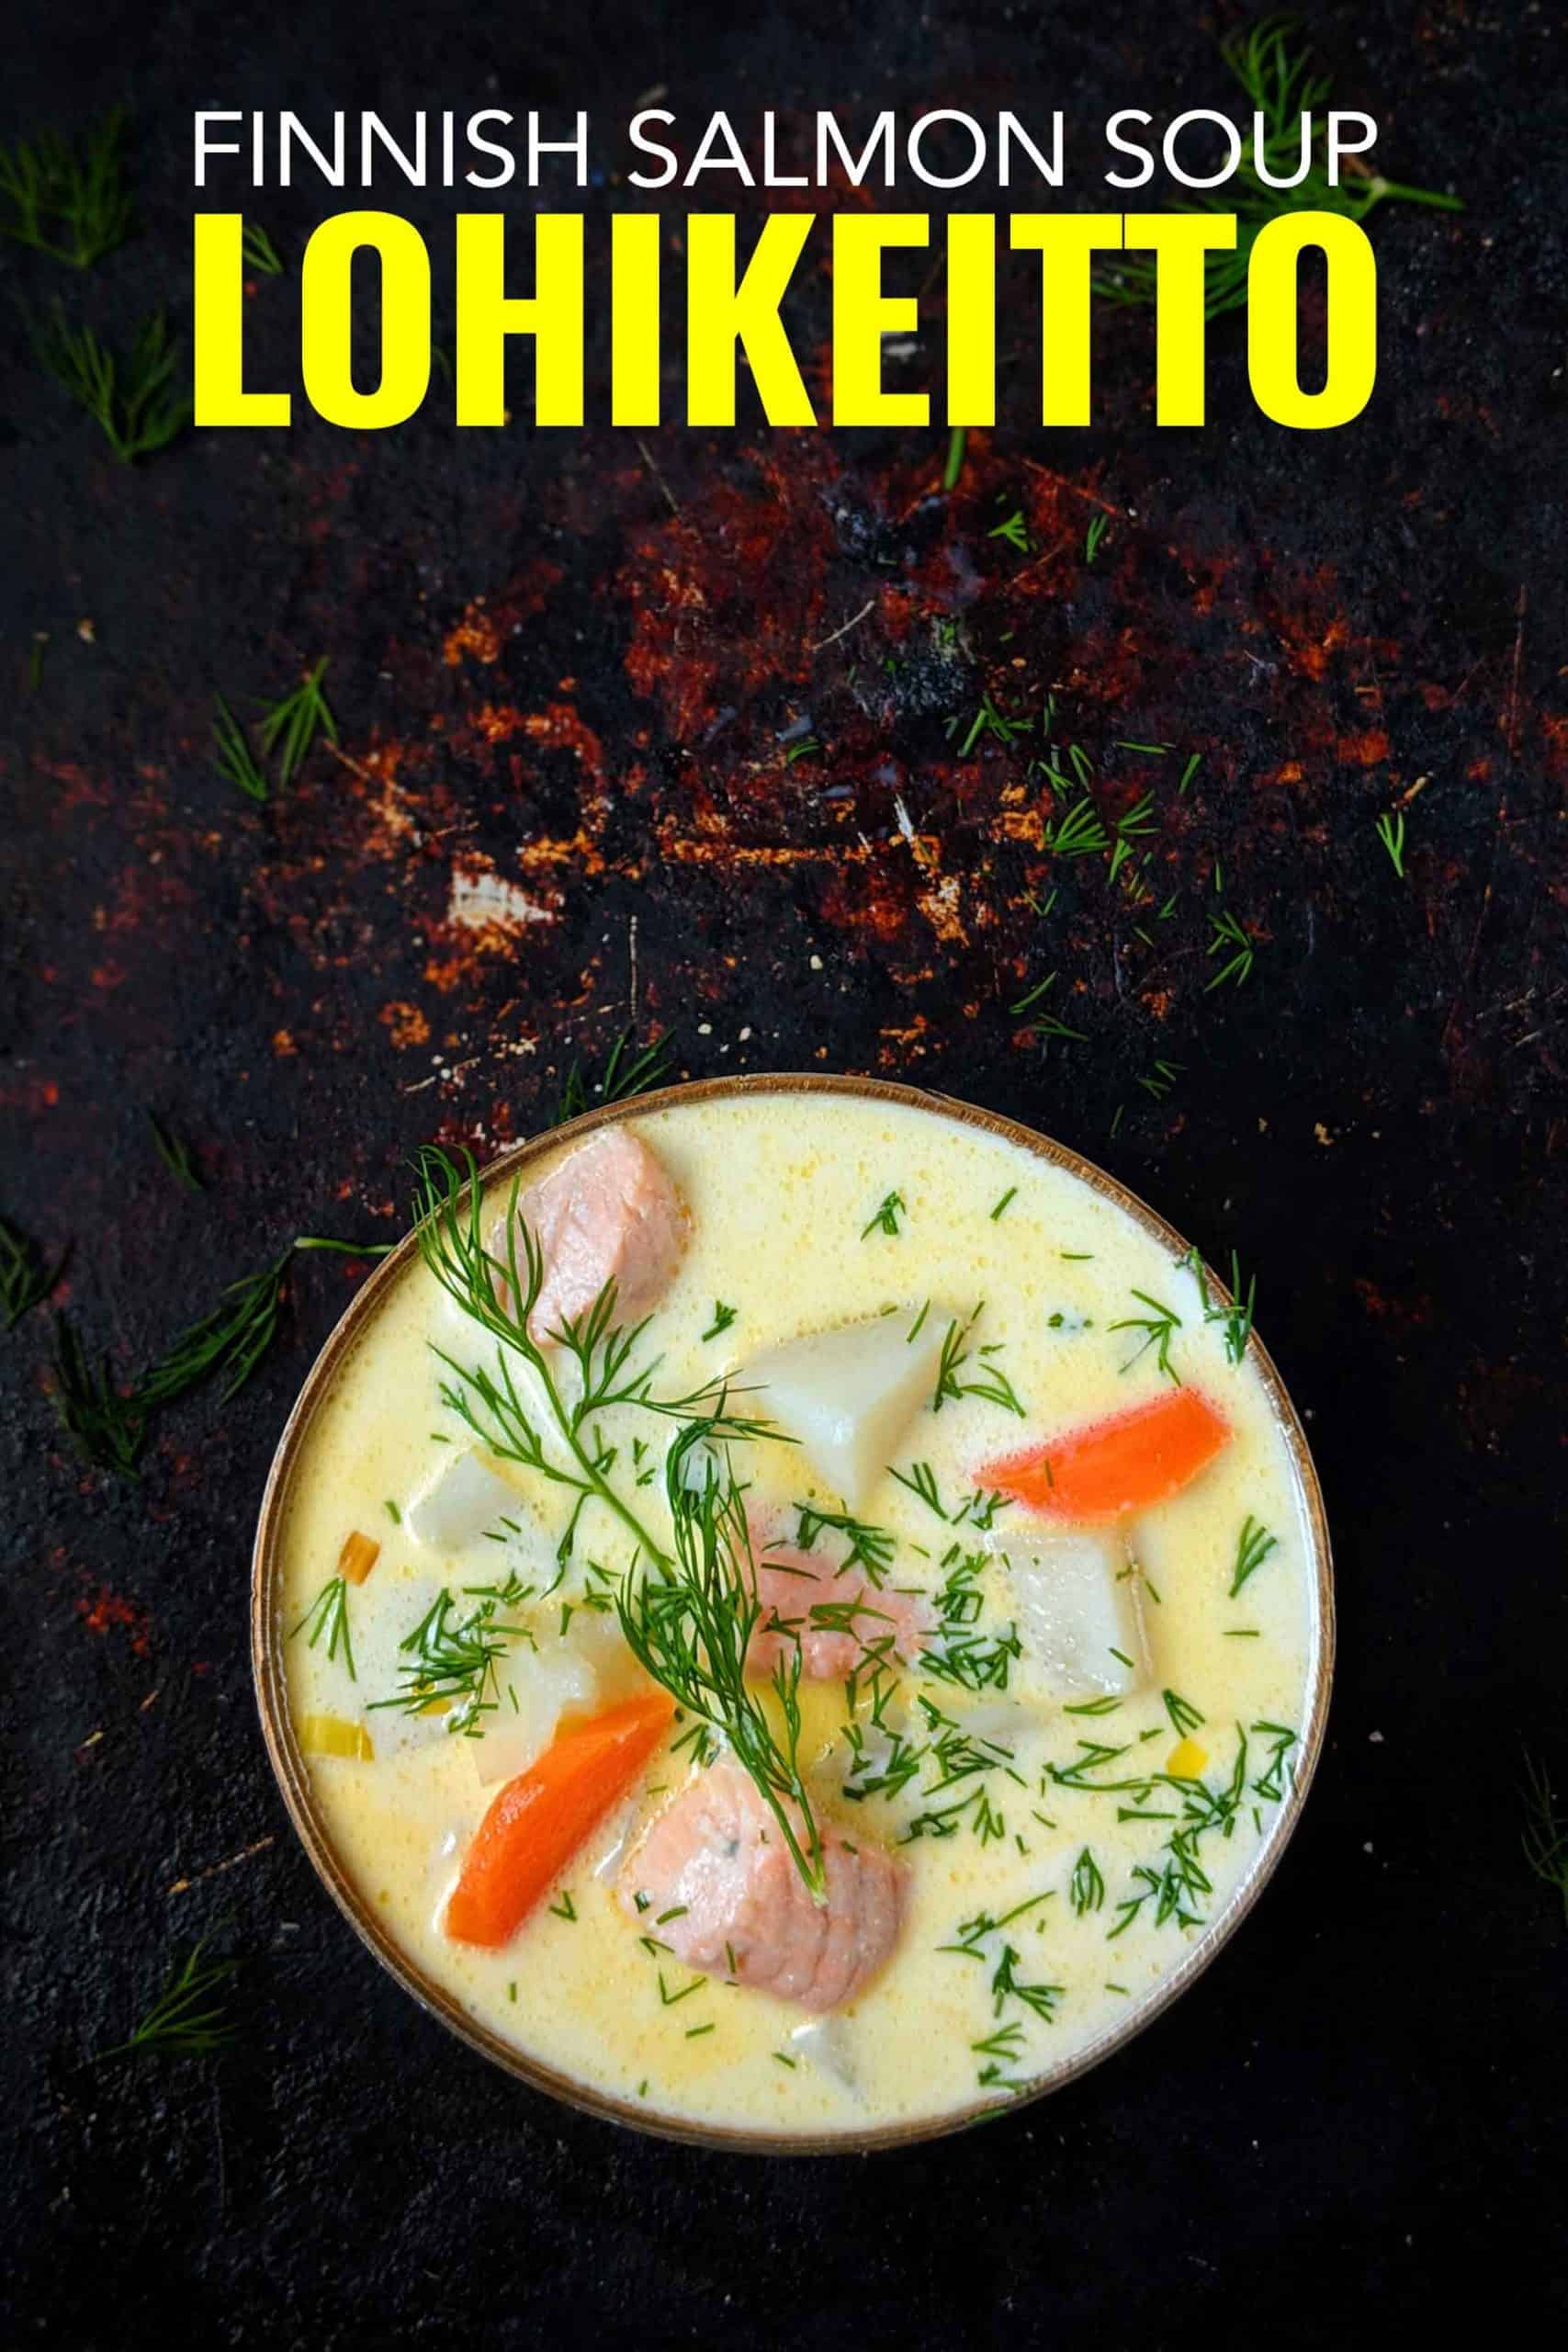 Lohikeitto is a creamy Finnish salmon soup, this recipe is unbelievably easy to make.